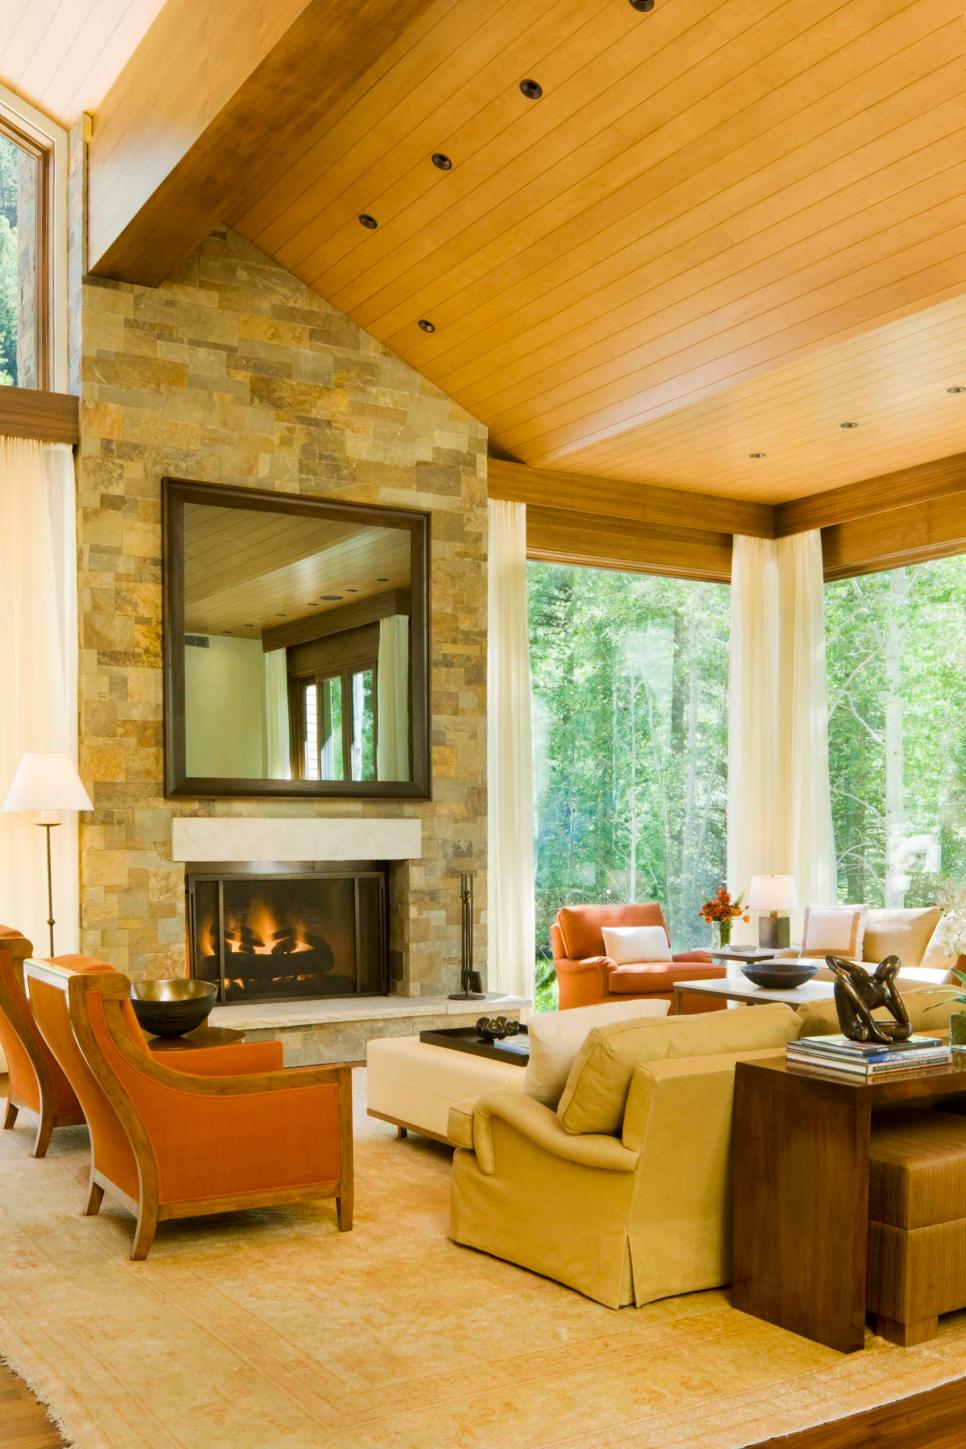 Transitional Living Room With Stone Fireplace and High ...